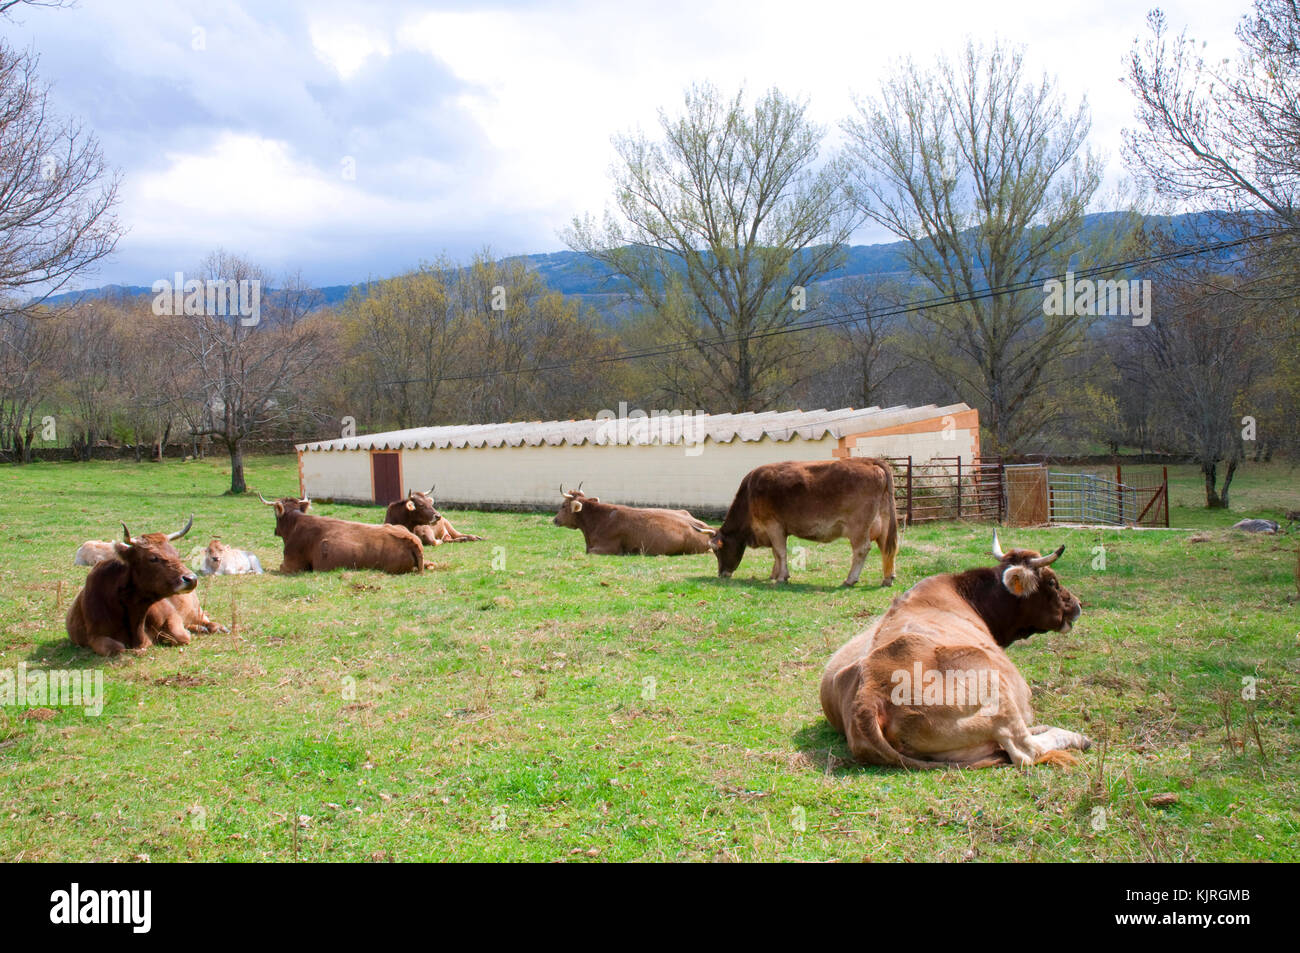 Cows in the meadow. Sierra del Rincon, Madrid province, Spain. Stock Photo